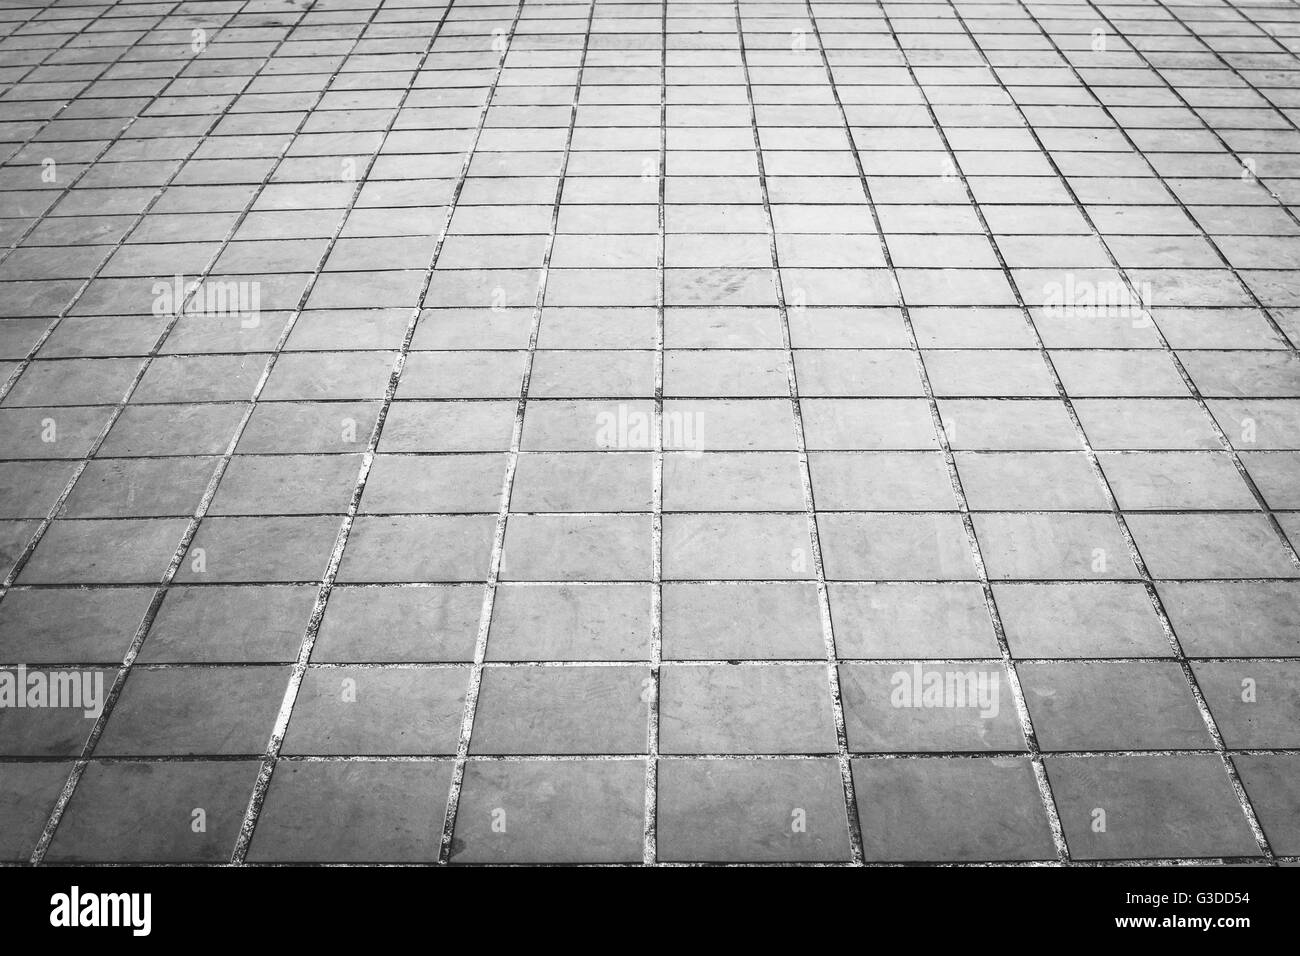 Grunge floor tiles and square shape texture and background Stock Photo